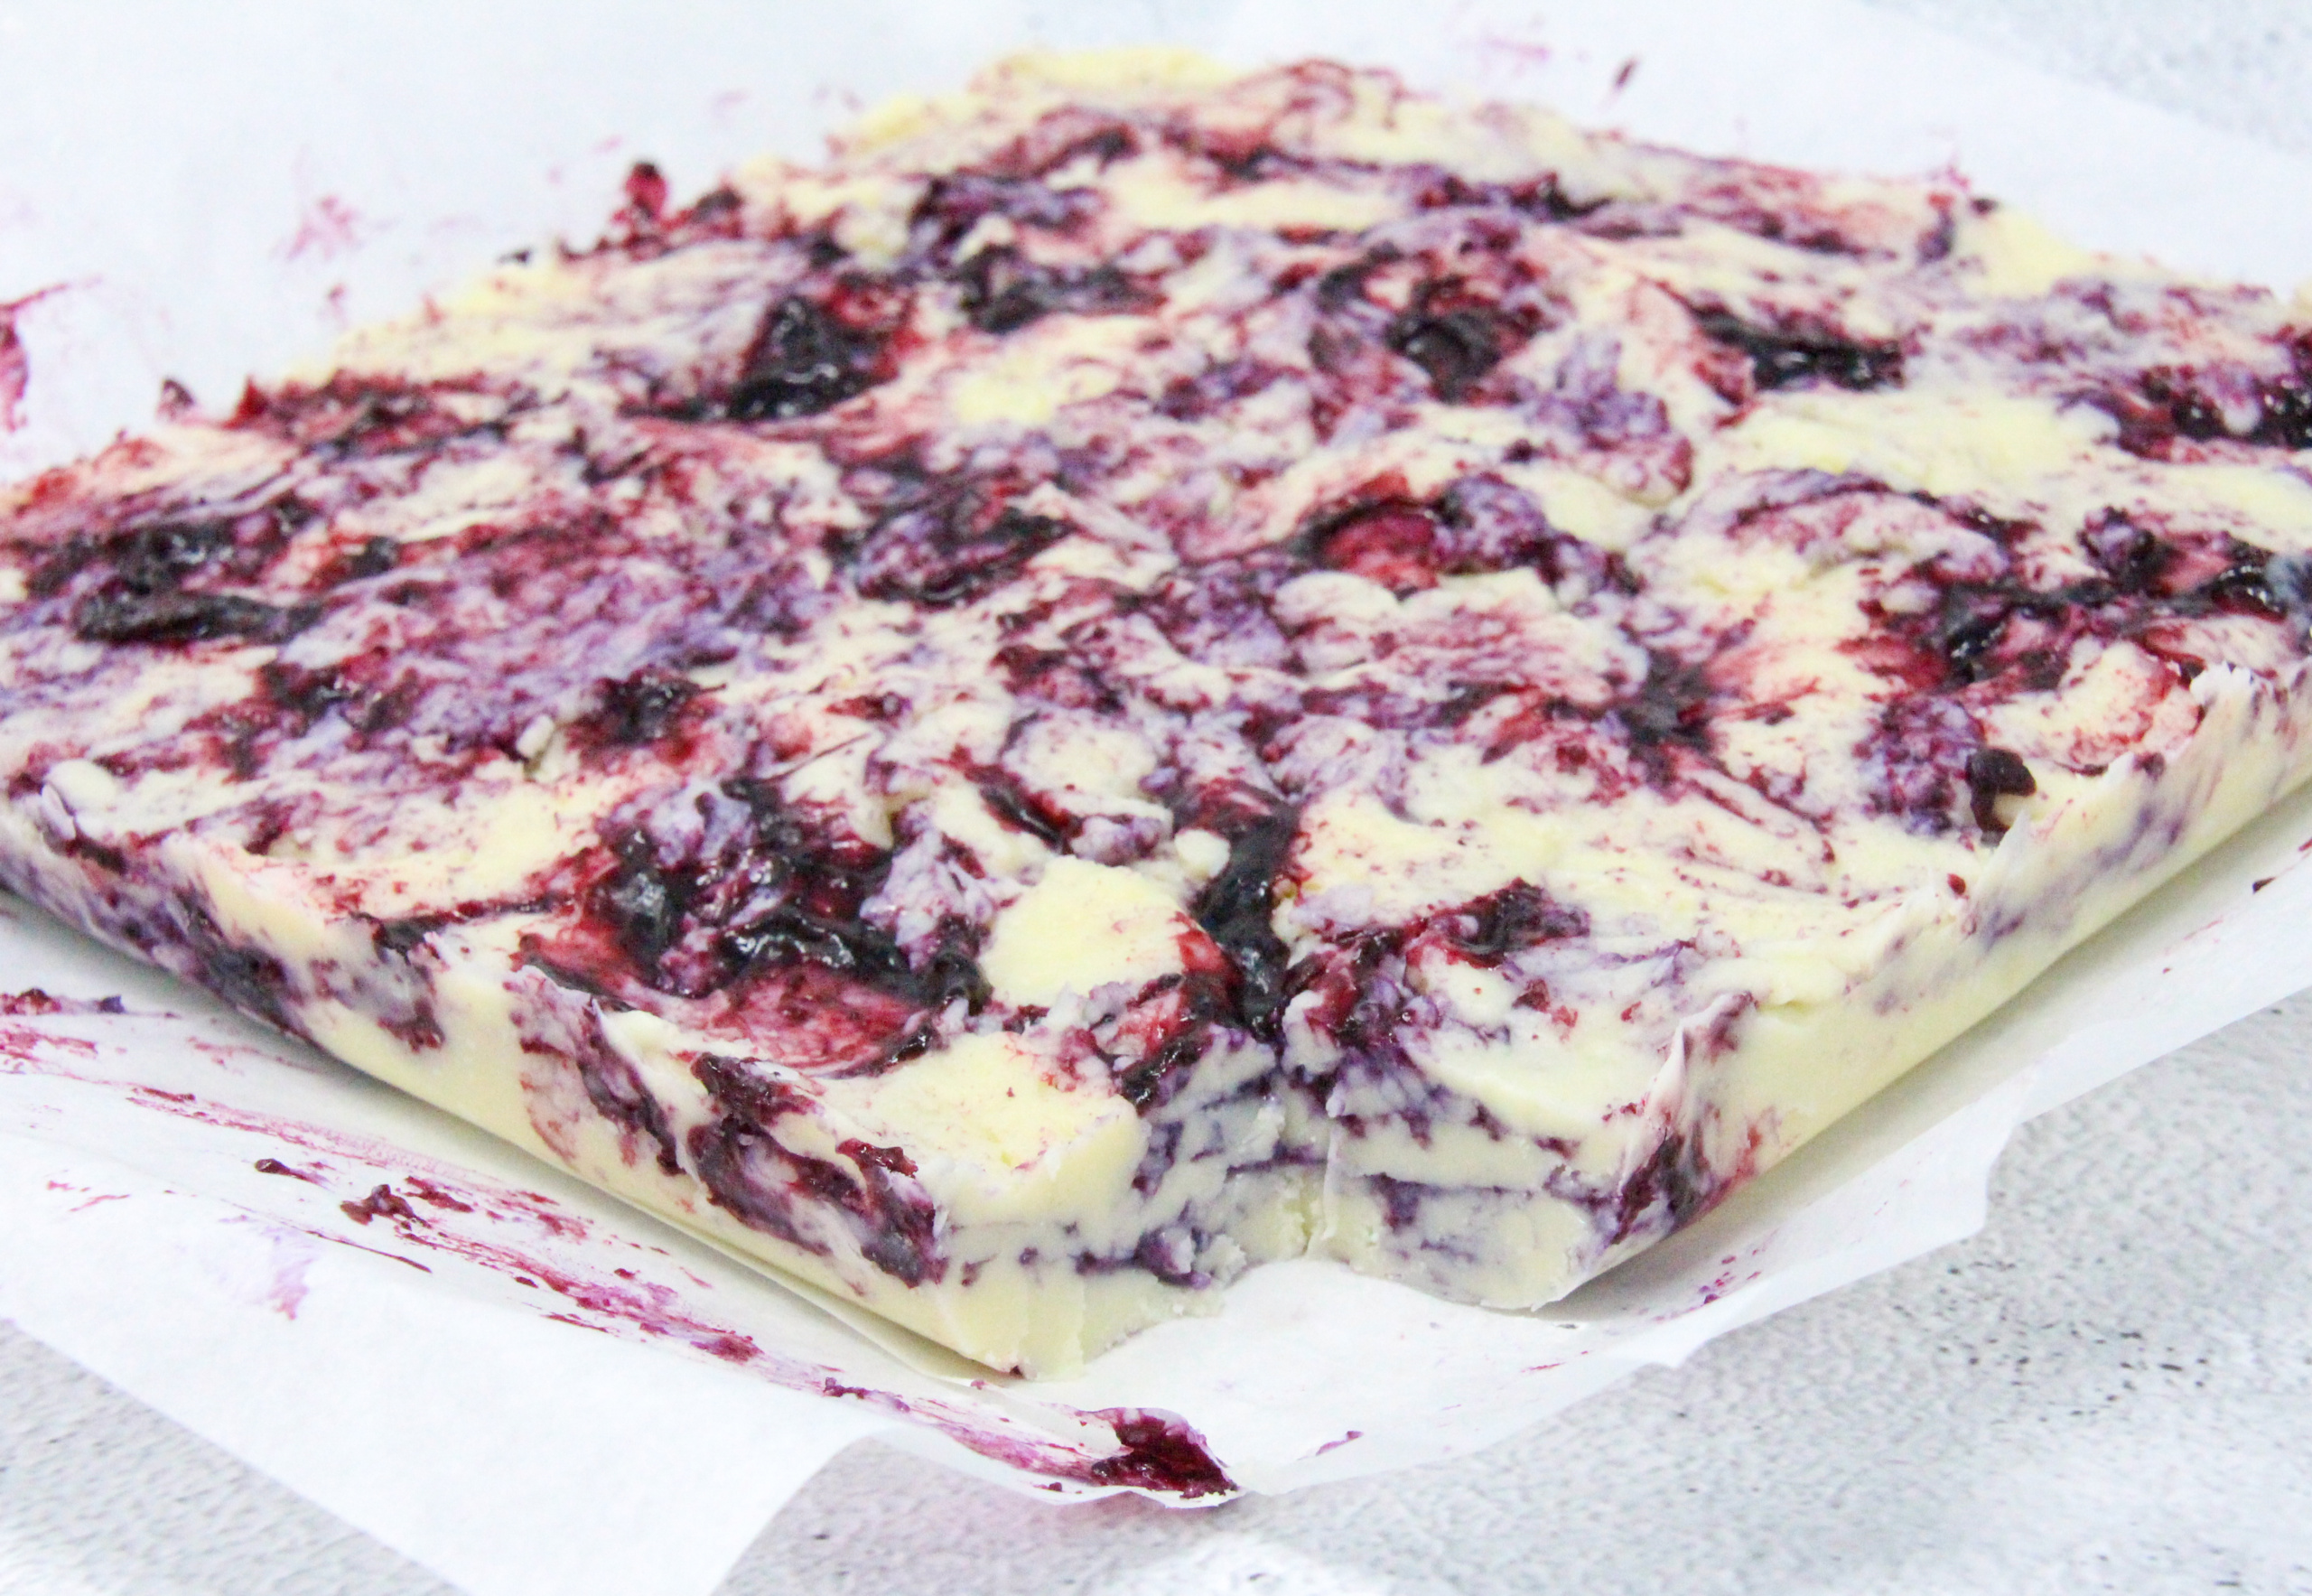 White chocolate layered with a fresh blueberry coulis combines two delectable tastes into one delicious Blueberry-and-Cream Fudge candy. Recipe shared with permission granted by Amanda Flowers, author of BLUEBERRY BLUNDER.